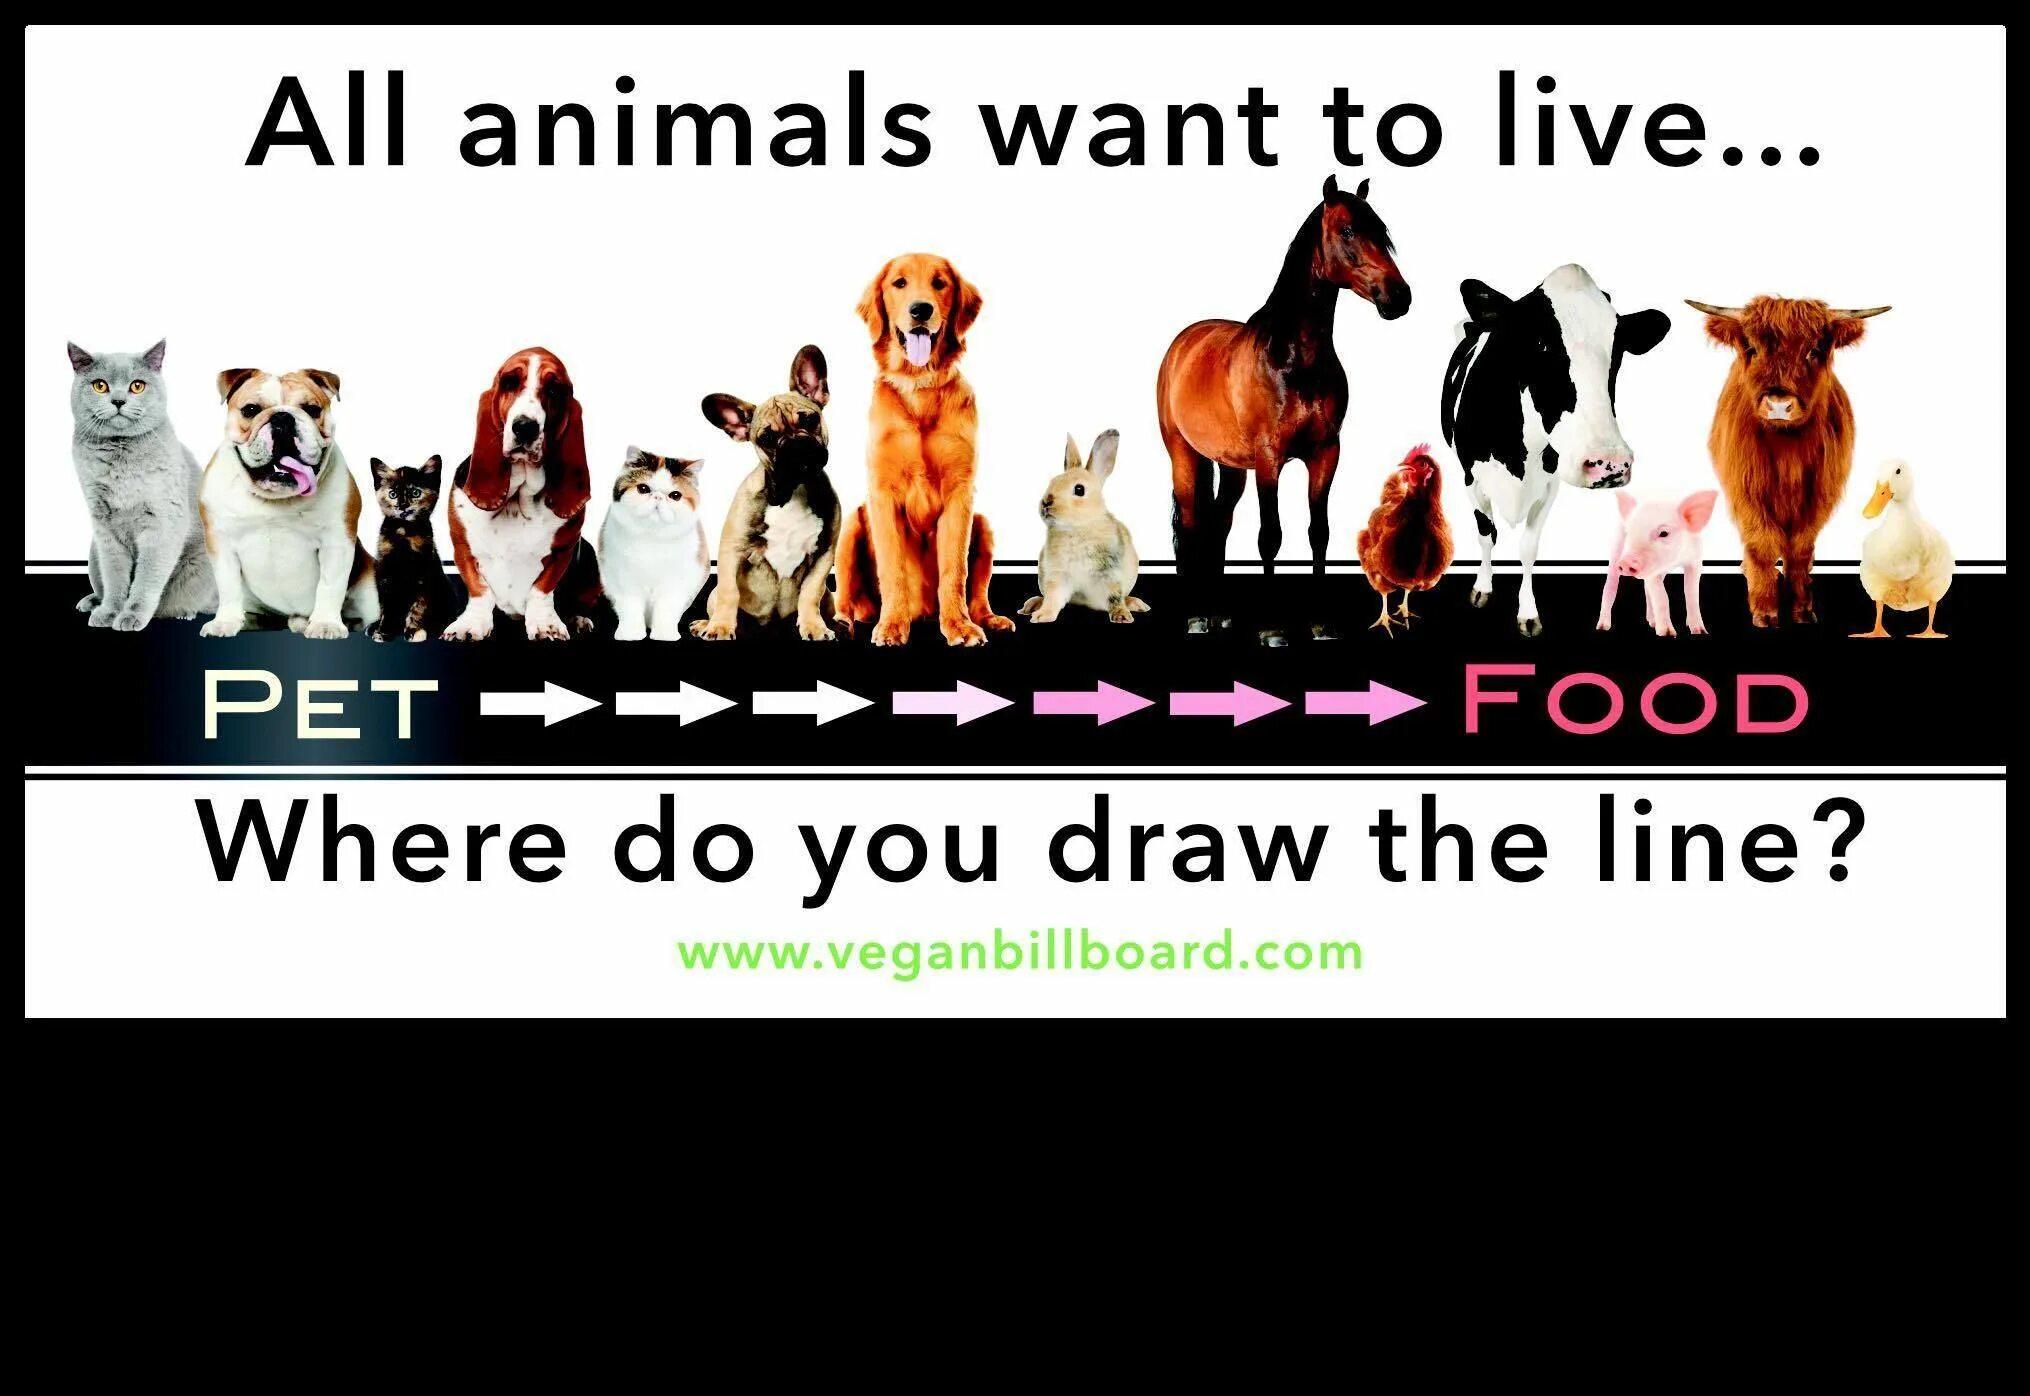 Talking about where you live. All animals want to Live where do you draw the line. Where do you Live. All animals want to Live.